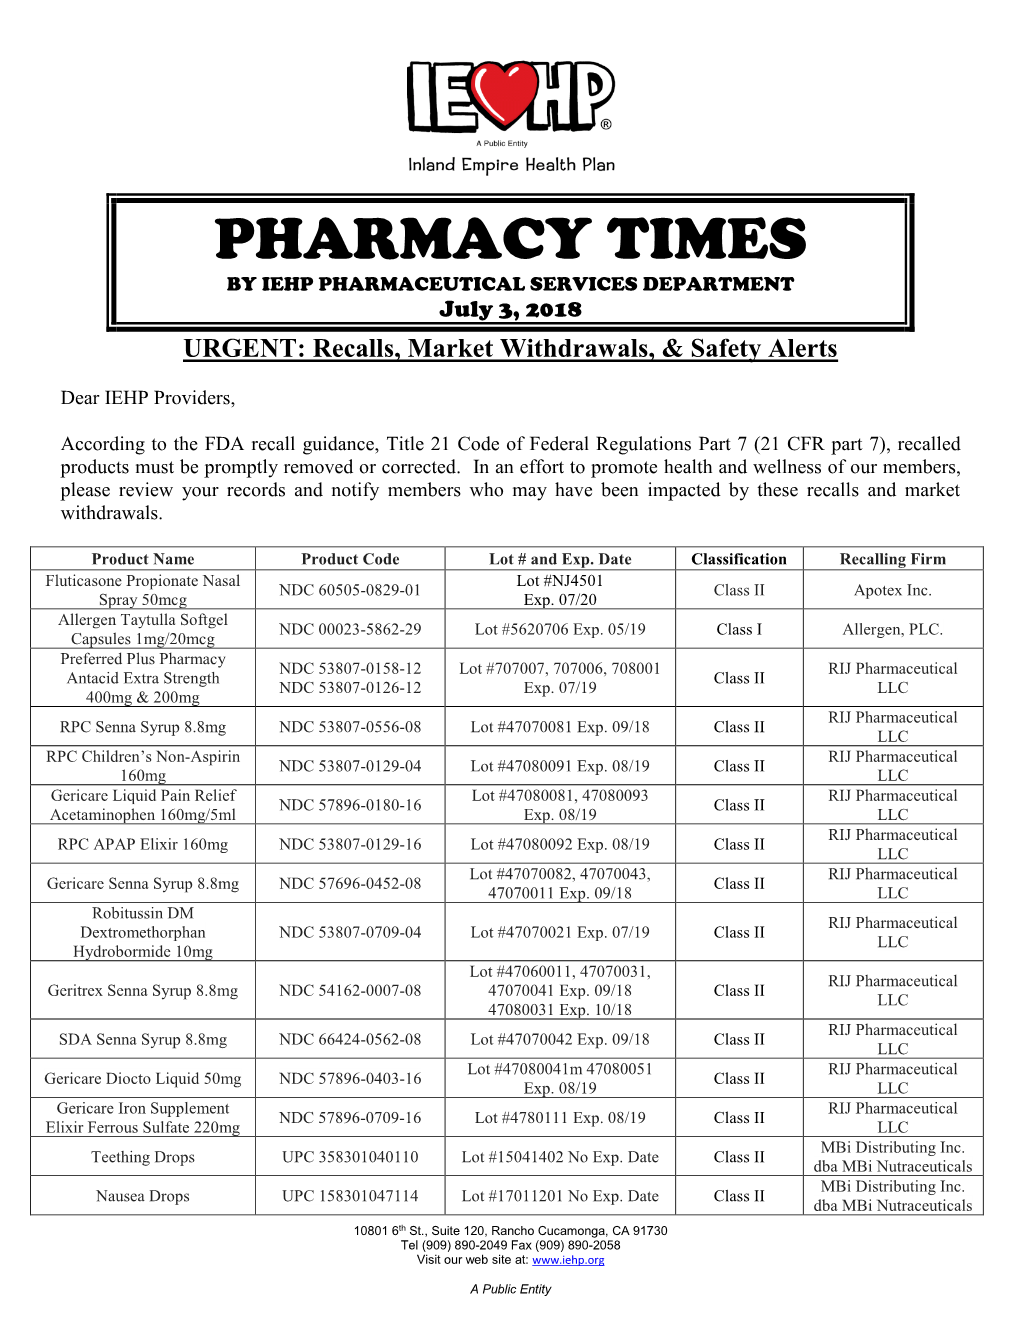 PHARMACY TIMES by IEHP PHARMACEUTICAL SERVICES DEPARTMENT July 3, 2018 URGENT: Recalls, Market Withdrawals, & Safety Alerts